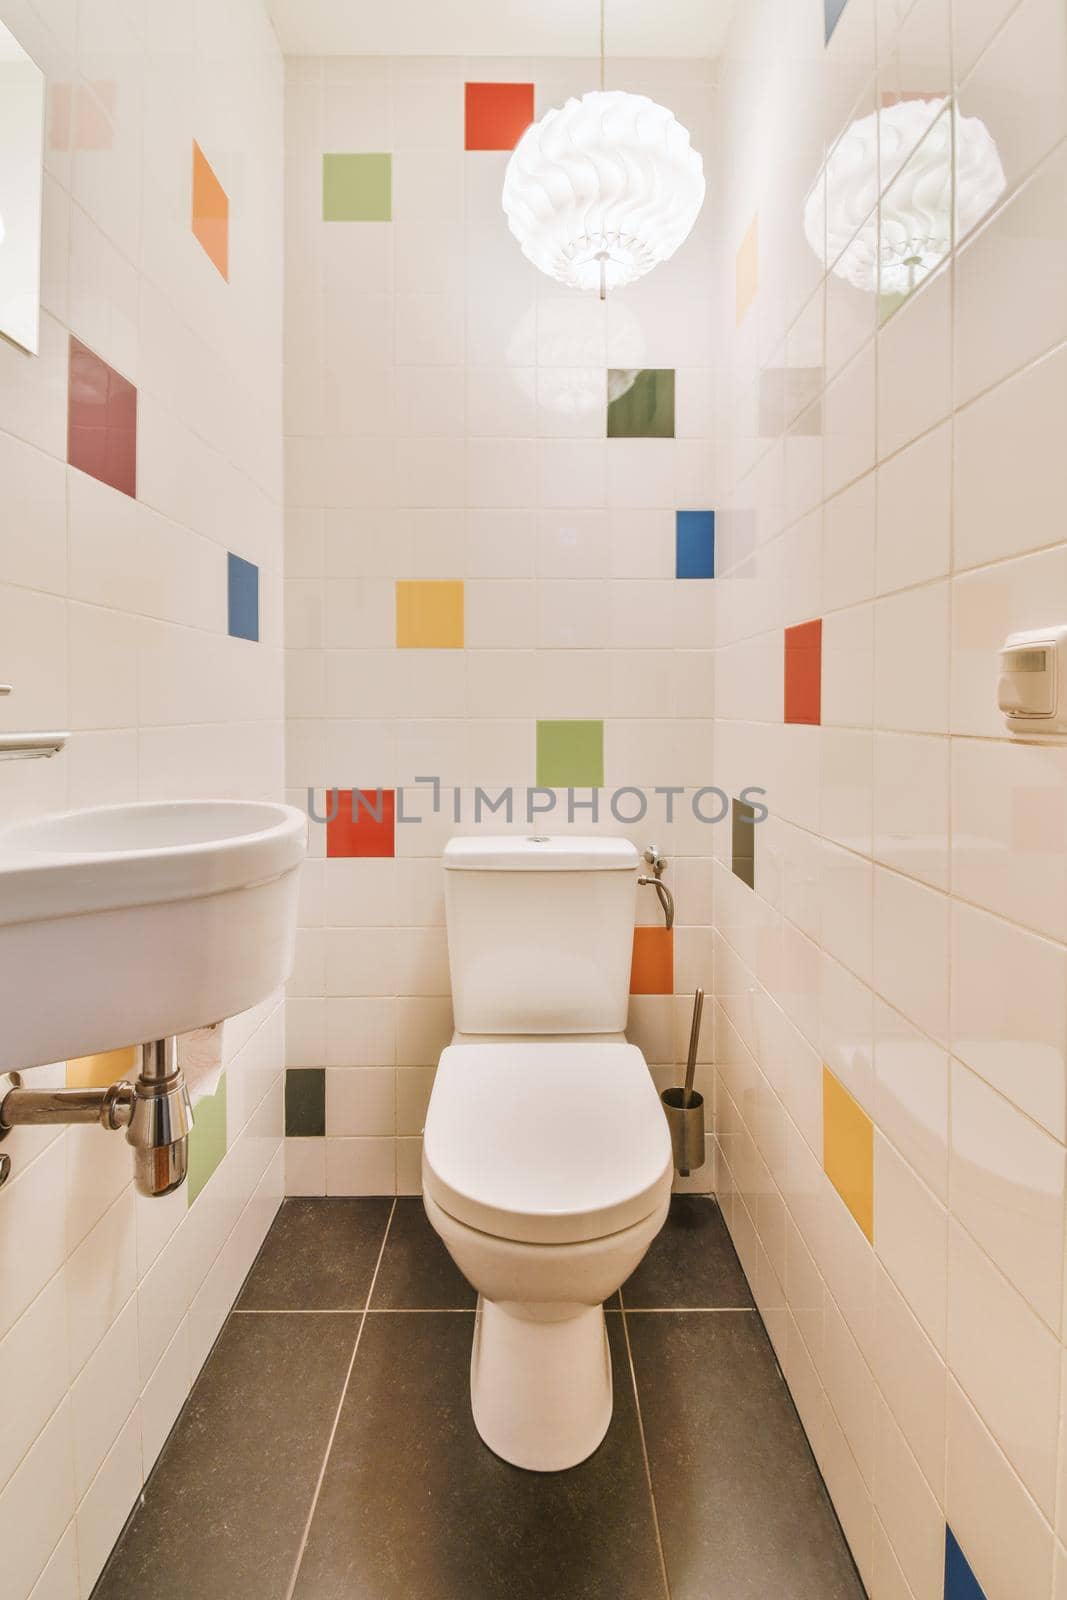 Toilet and small sink in narrow lavatory room with colourful tile and bright lamp